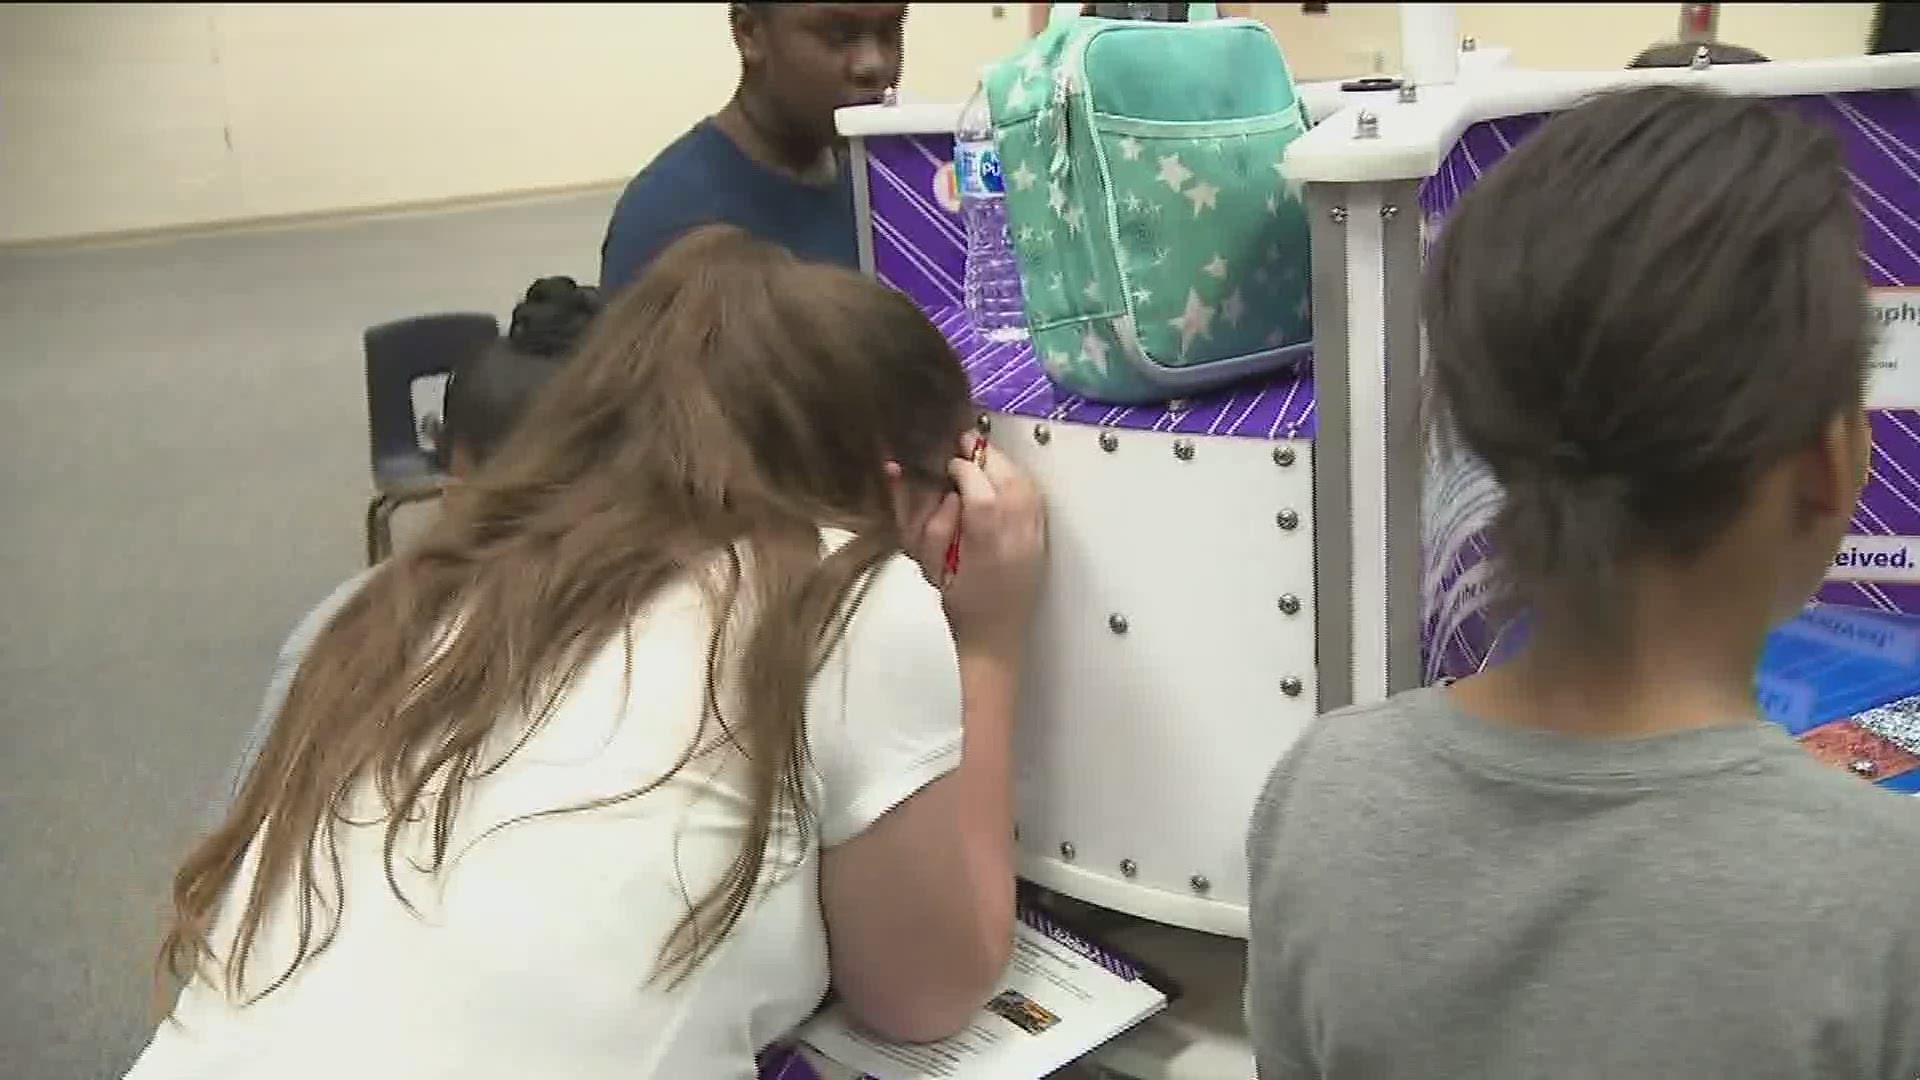 Students at a school district in the Poconos got their hands on a special learning opportunity.